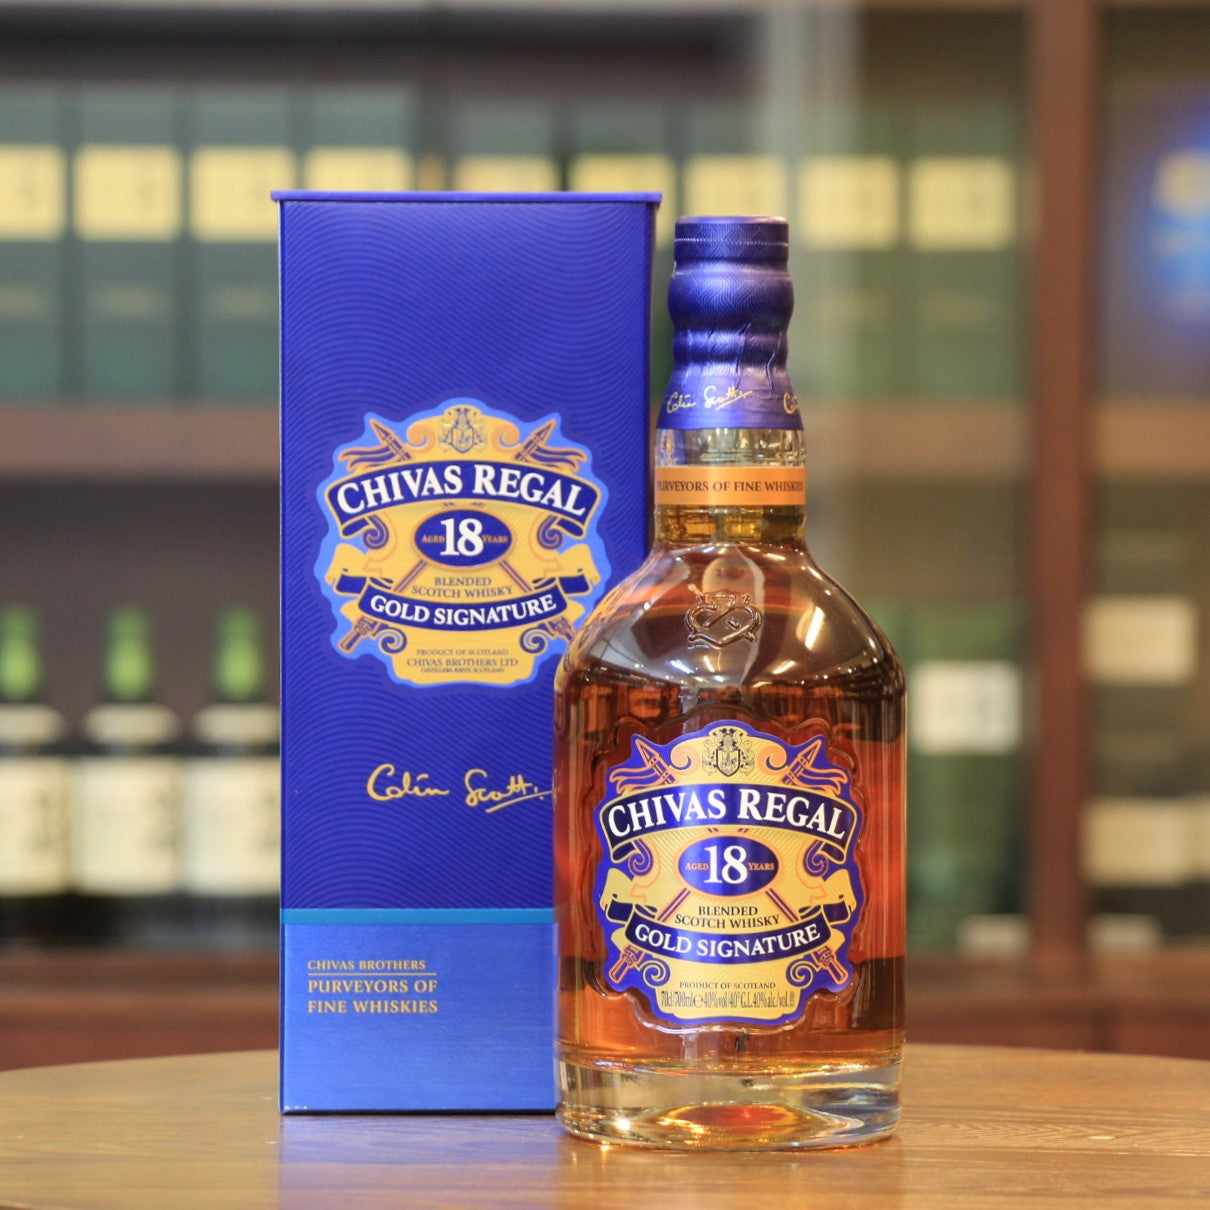 A benchmark in 18-year-old scotch blended whisky, was from Chivas Regal gold signature and featuring rich and complex flavours. 